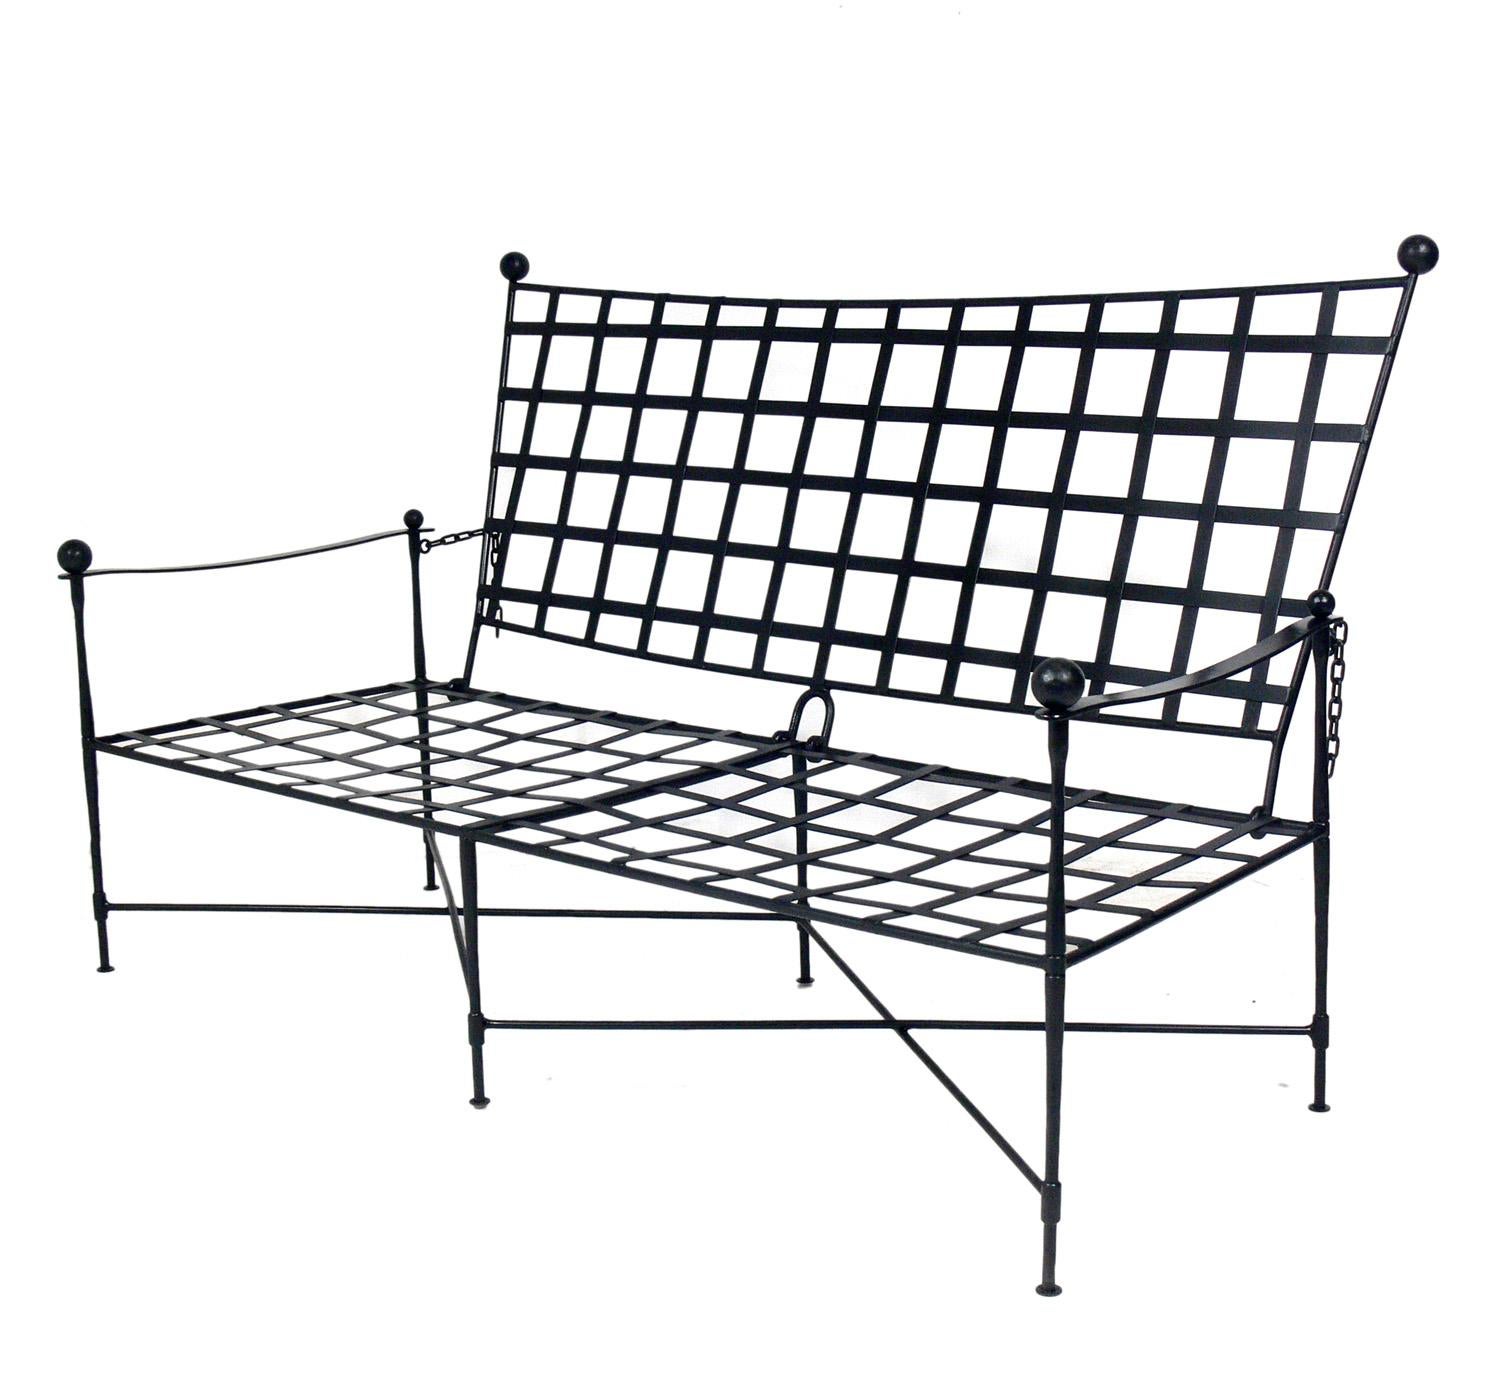 Iron settee or sofa, design attributed to Mario Papperzini for Salterini, Italian, circa 1950s. This is a versatile form and it can be used indoors or outdoors. This sculptural design was used by Yves Saint Laurent in his personal residence at la